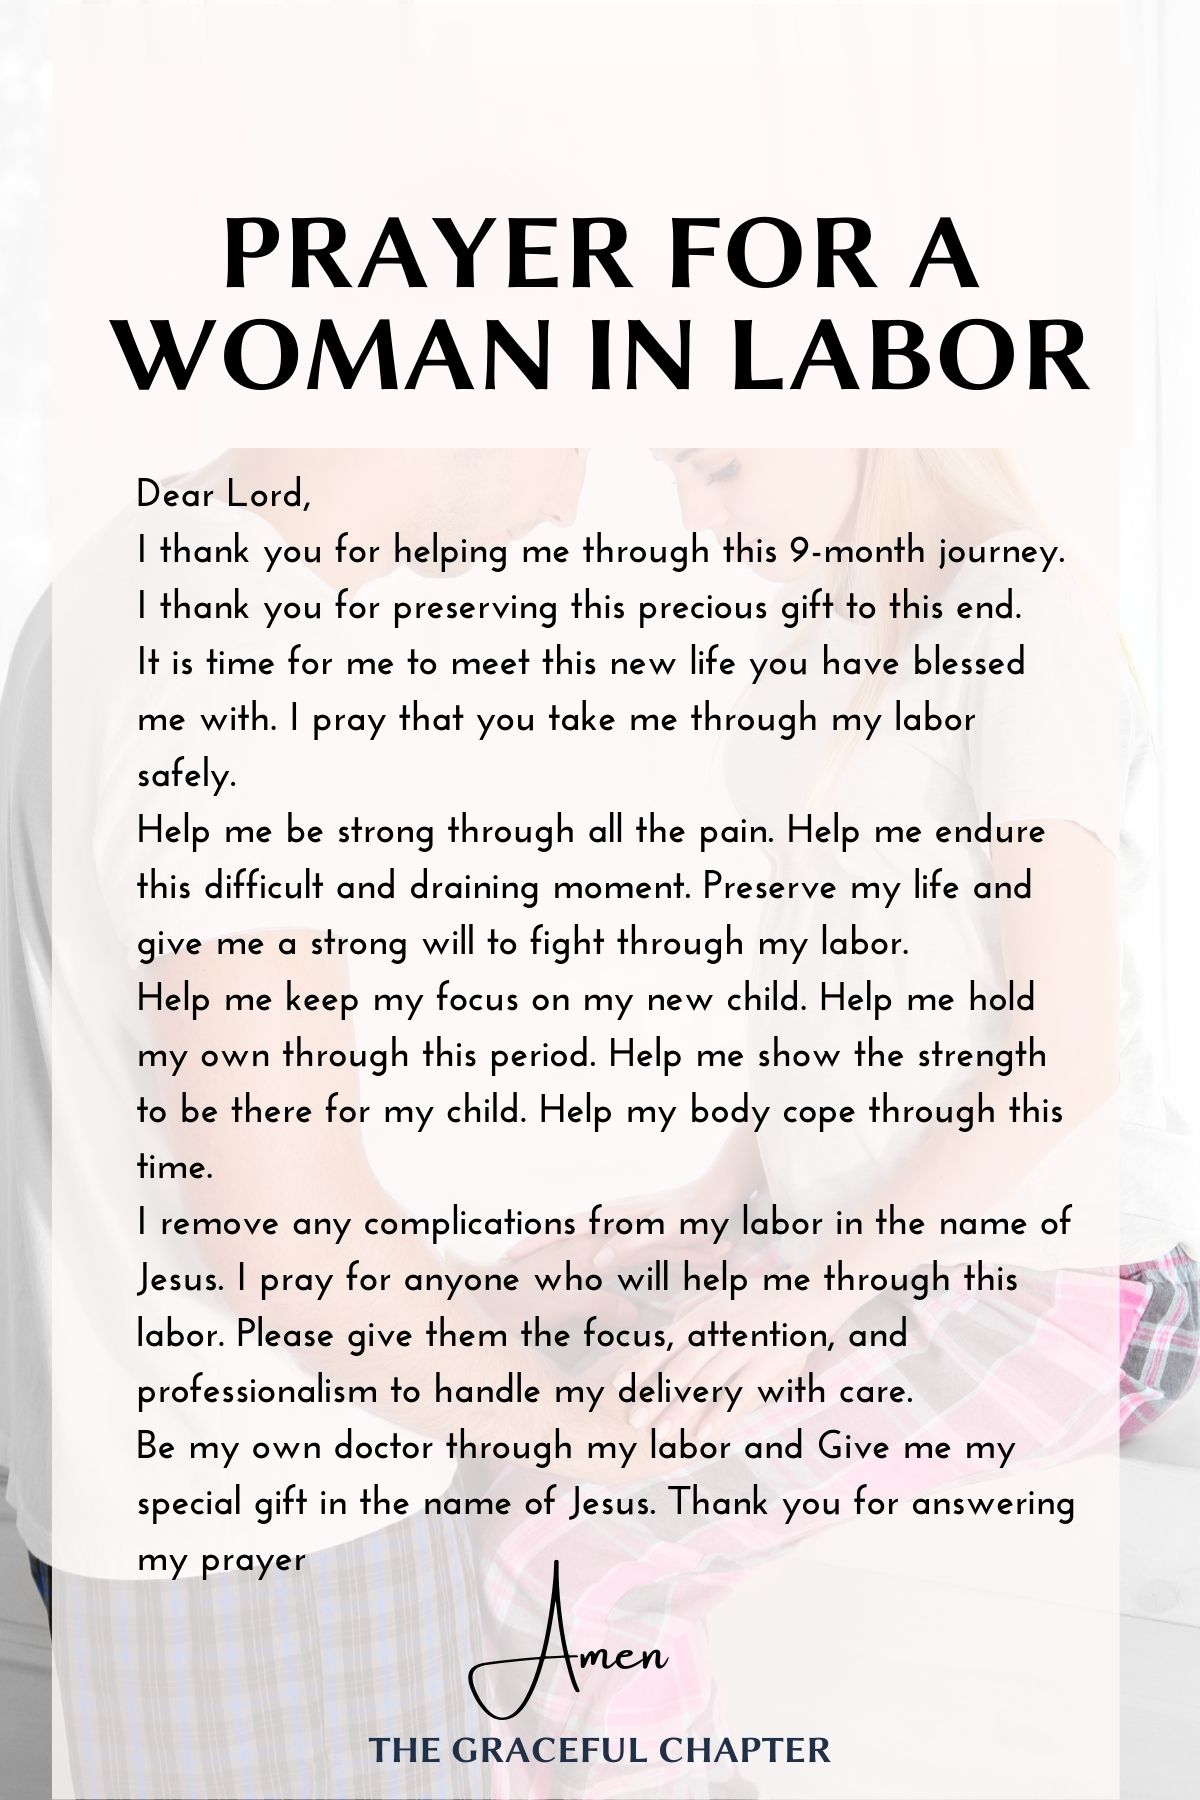 Prayer for a woman in labor